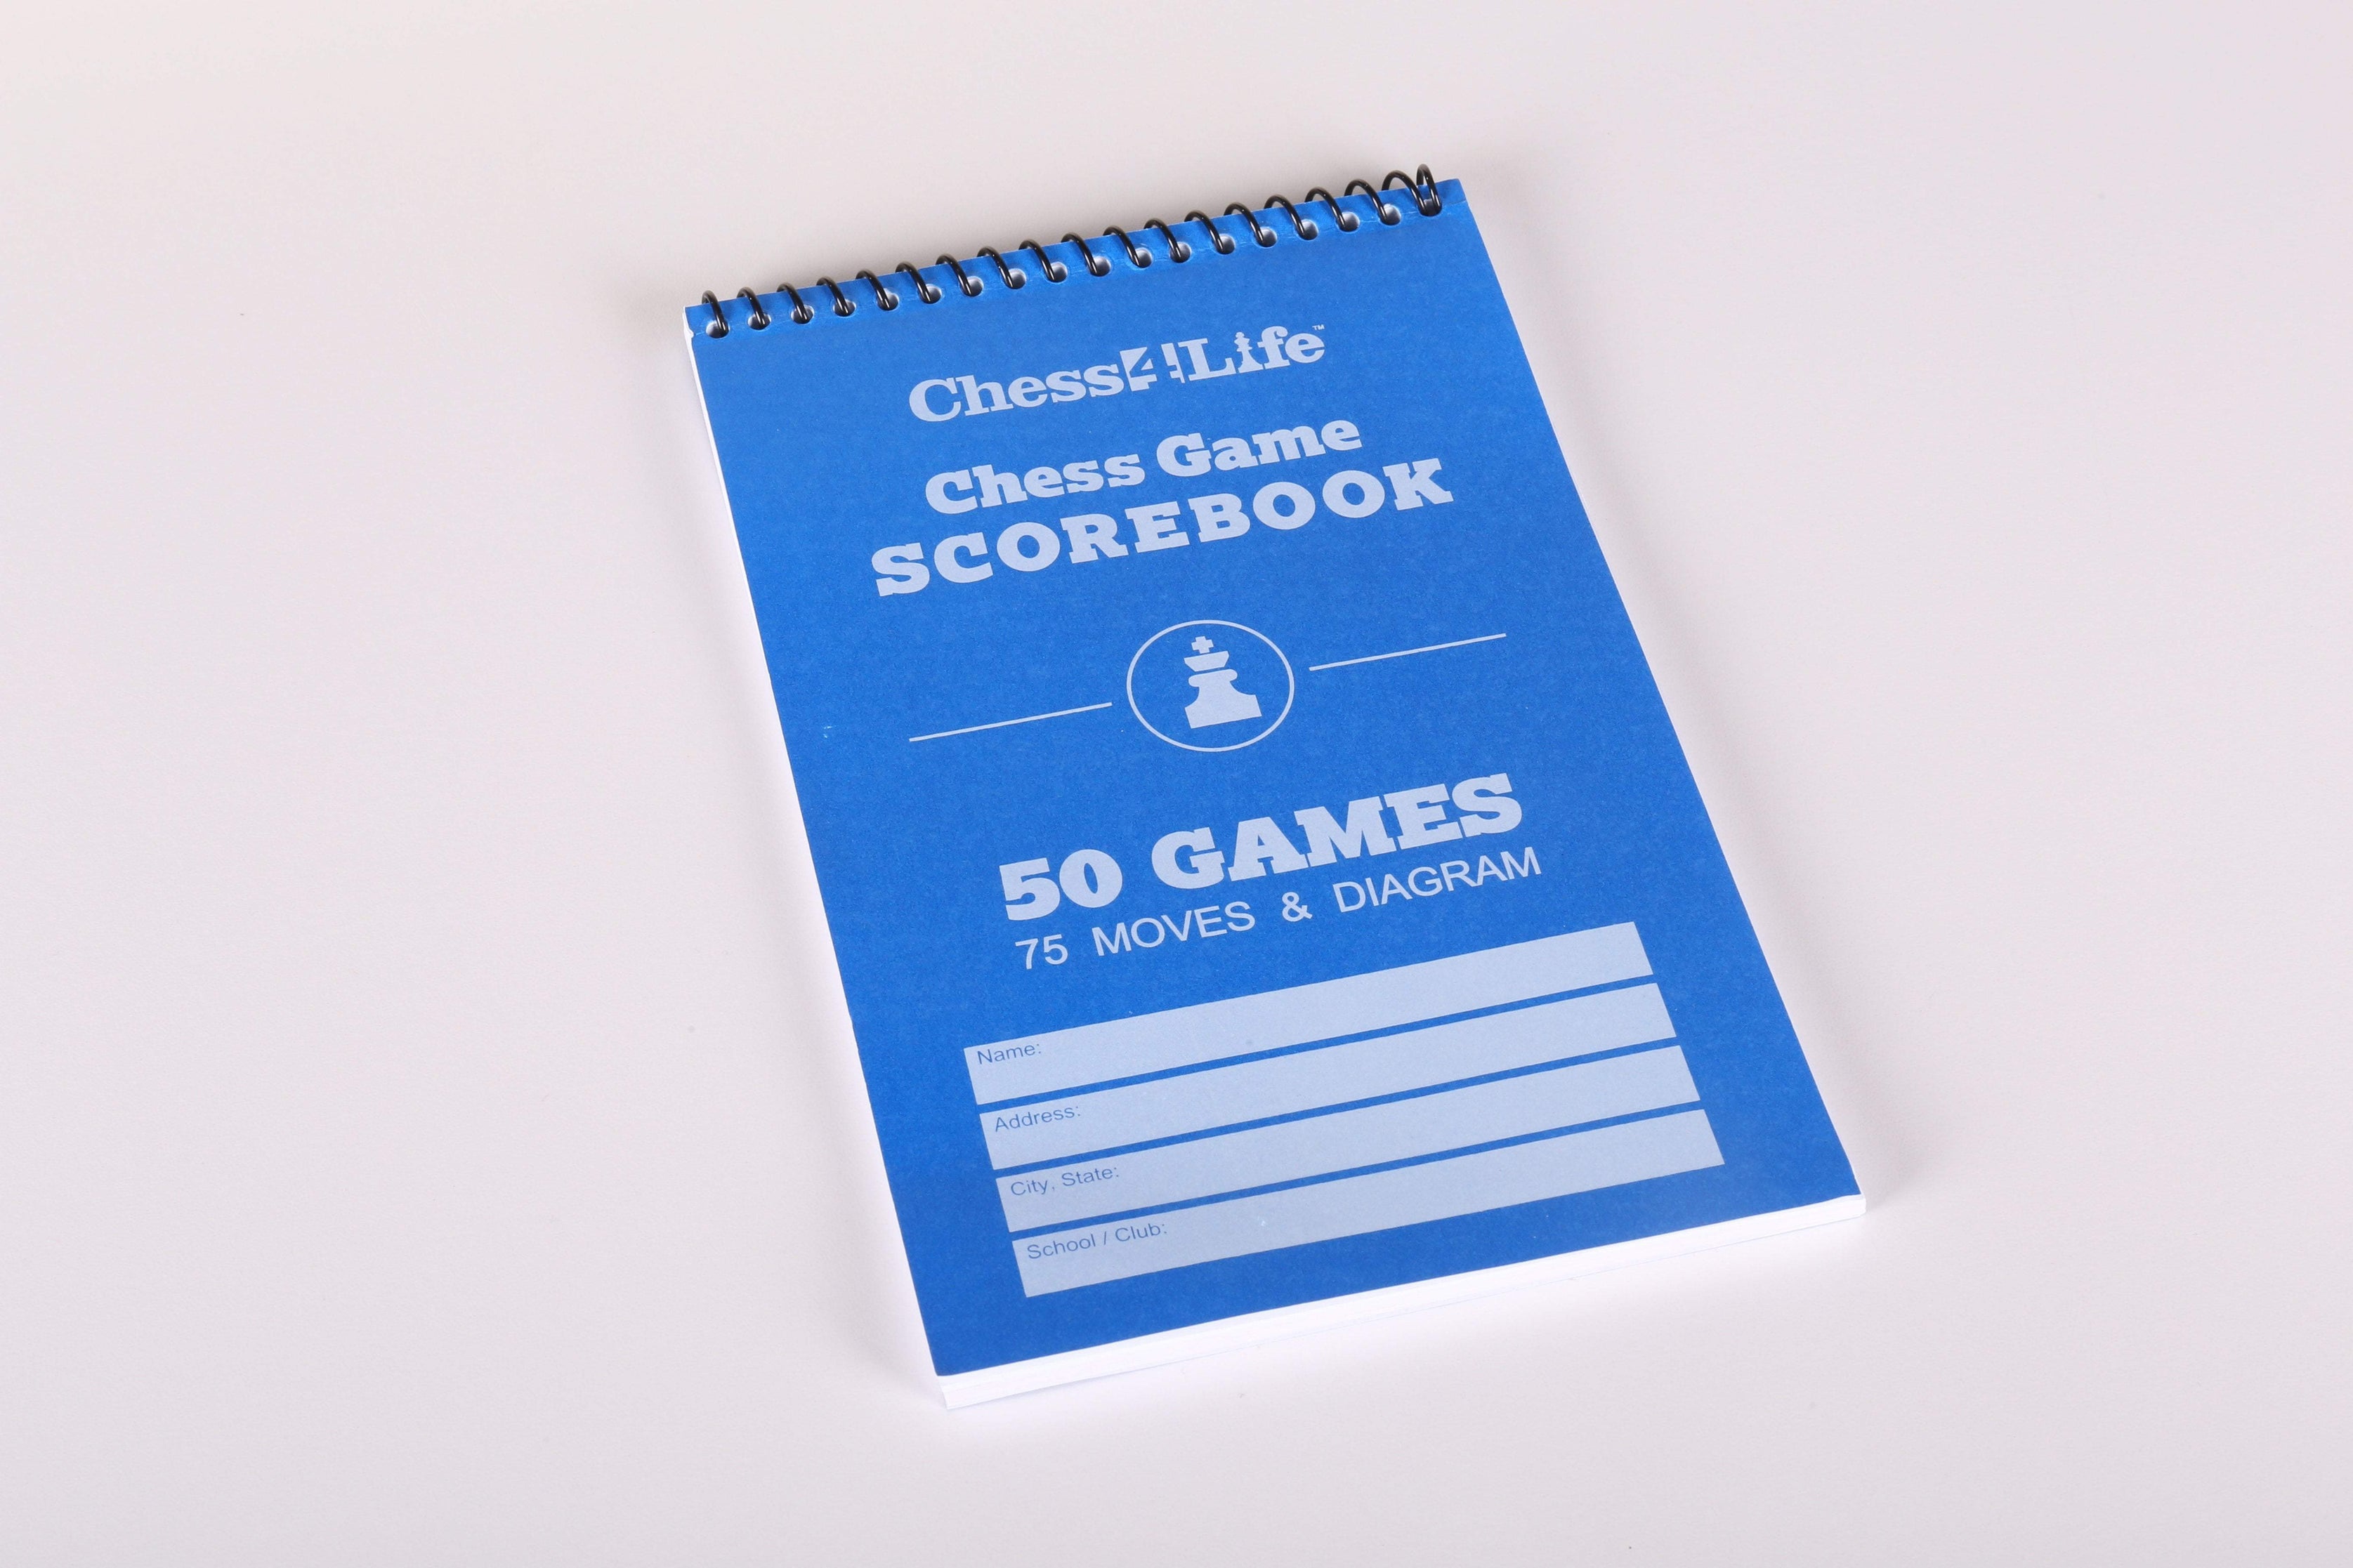 Stream {READ} 📖 Chess Score Sheets Log Book: Chess Notation Sheets  Scorebook for Game Analysis, Tournamen by Noocea